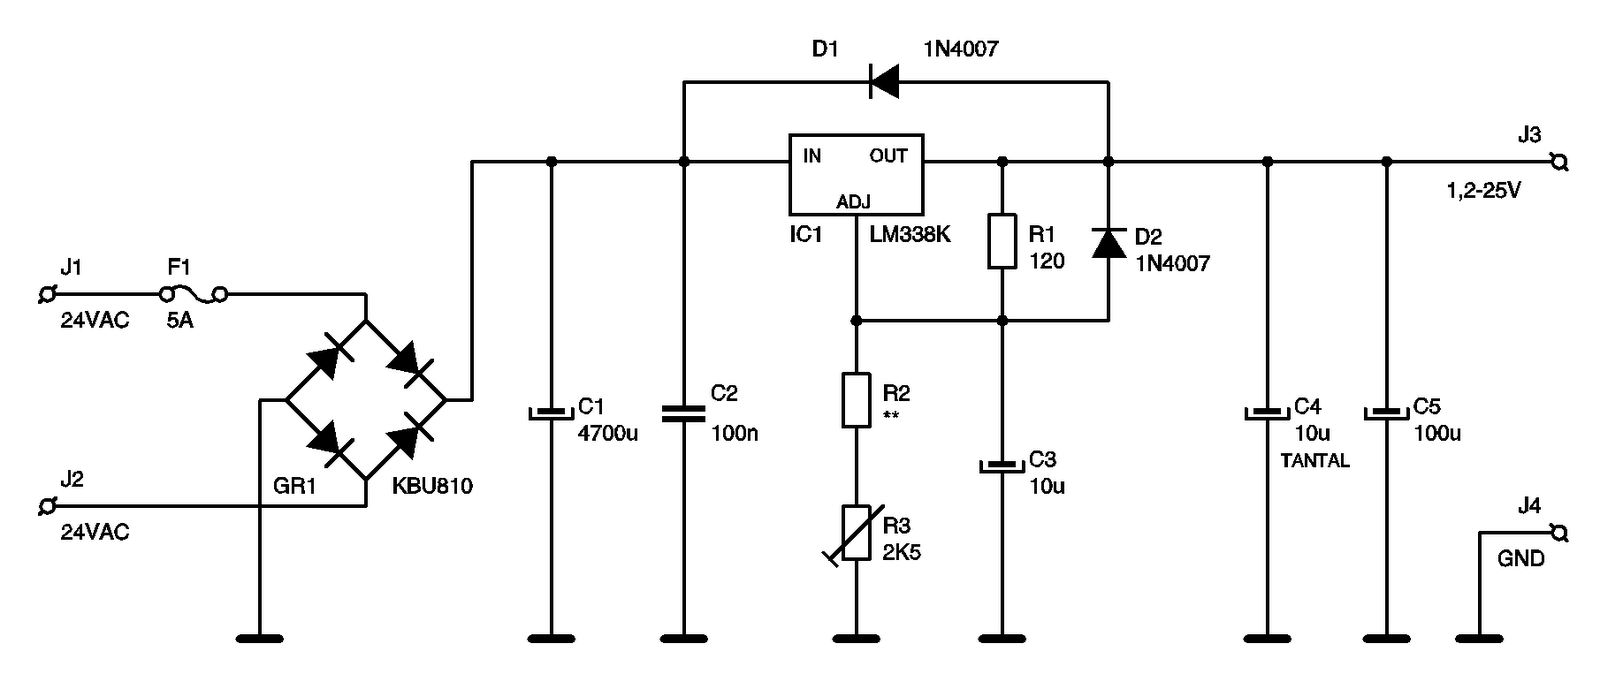 5A_Power_Supply_LM338K_Schematic.gif